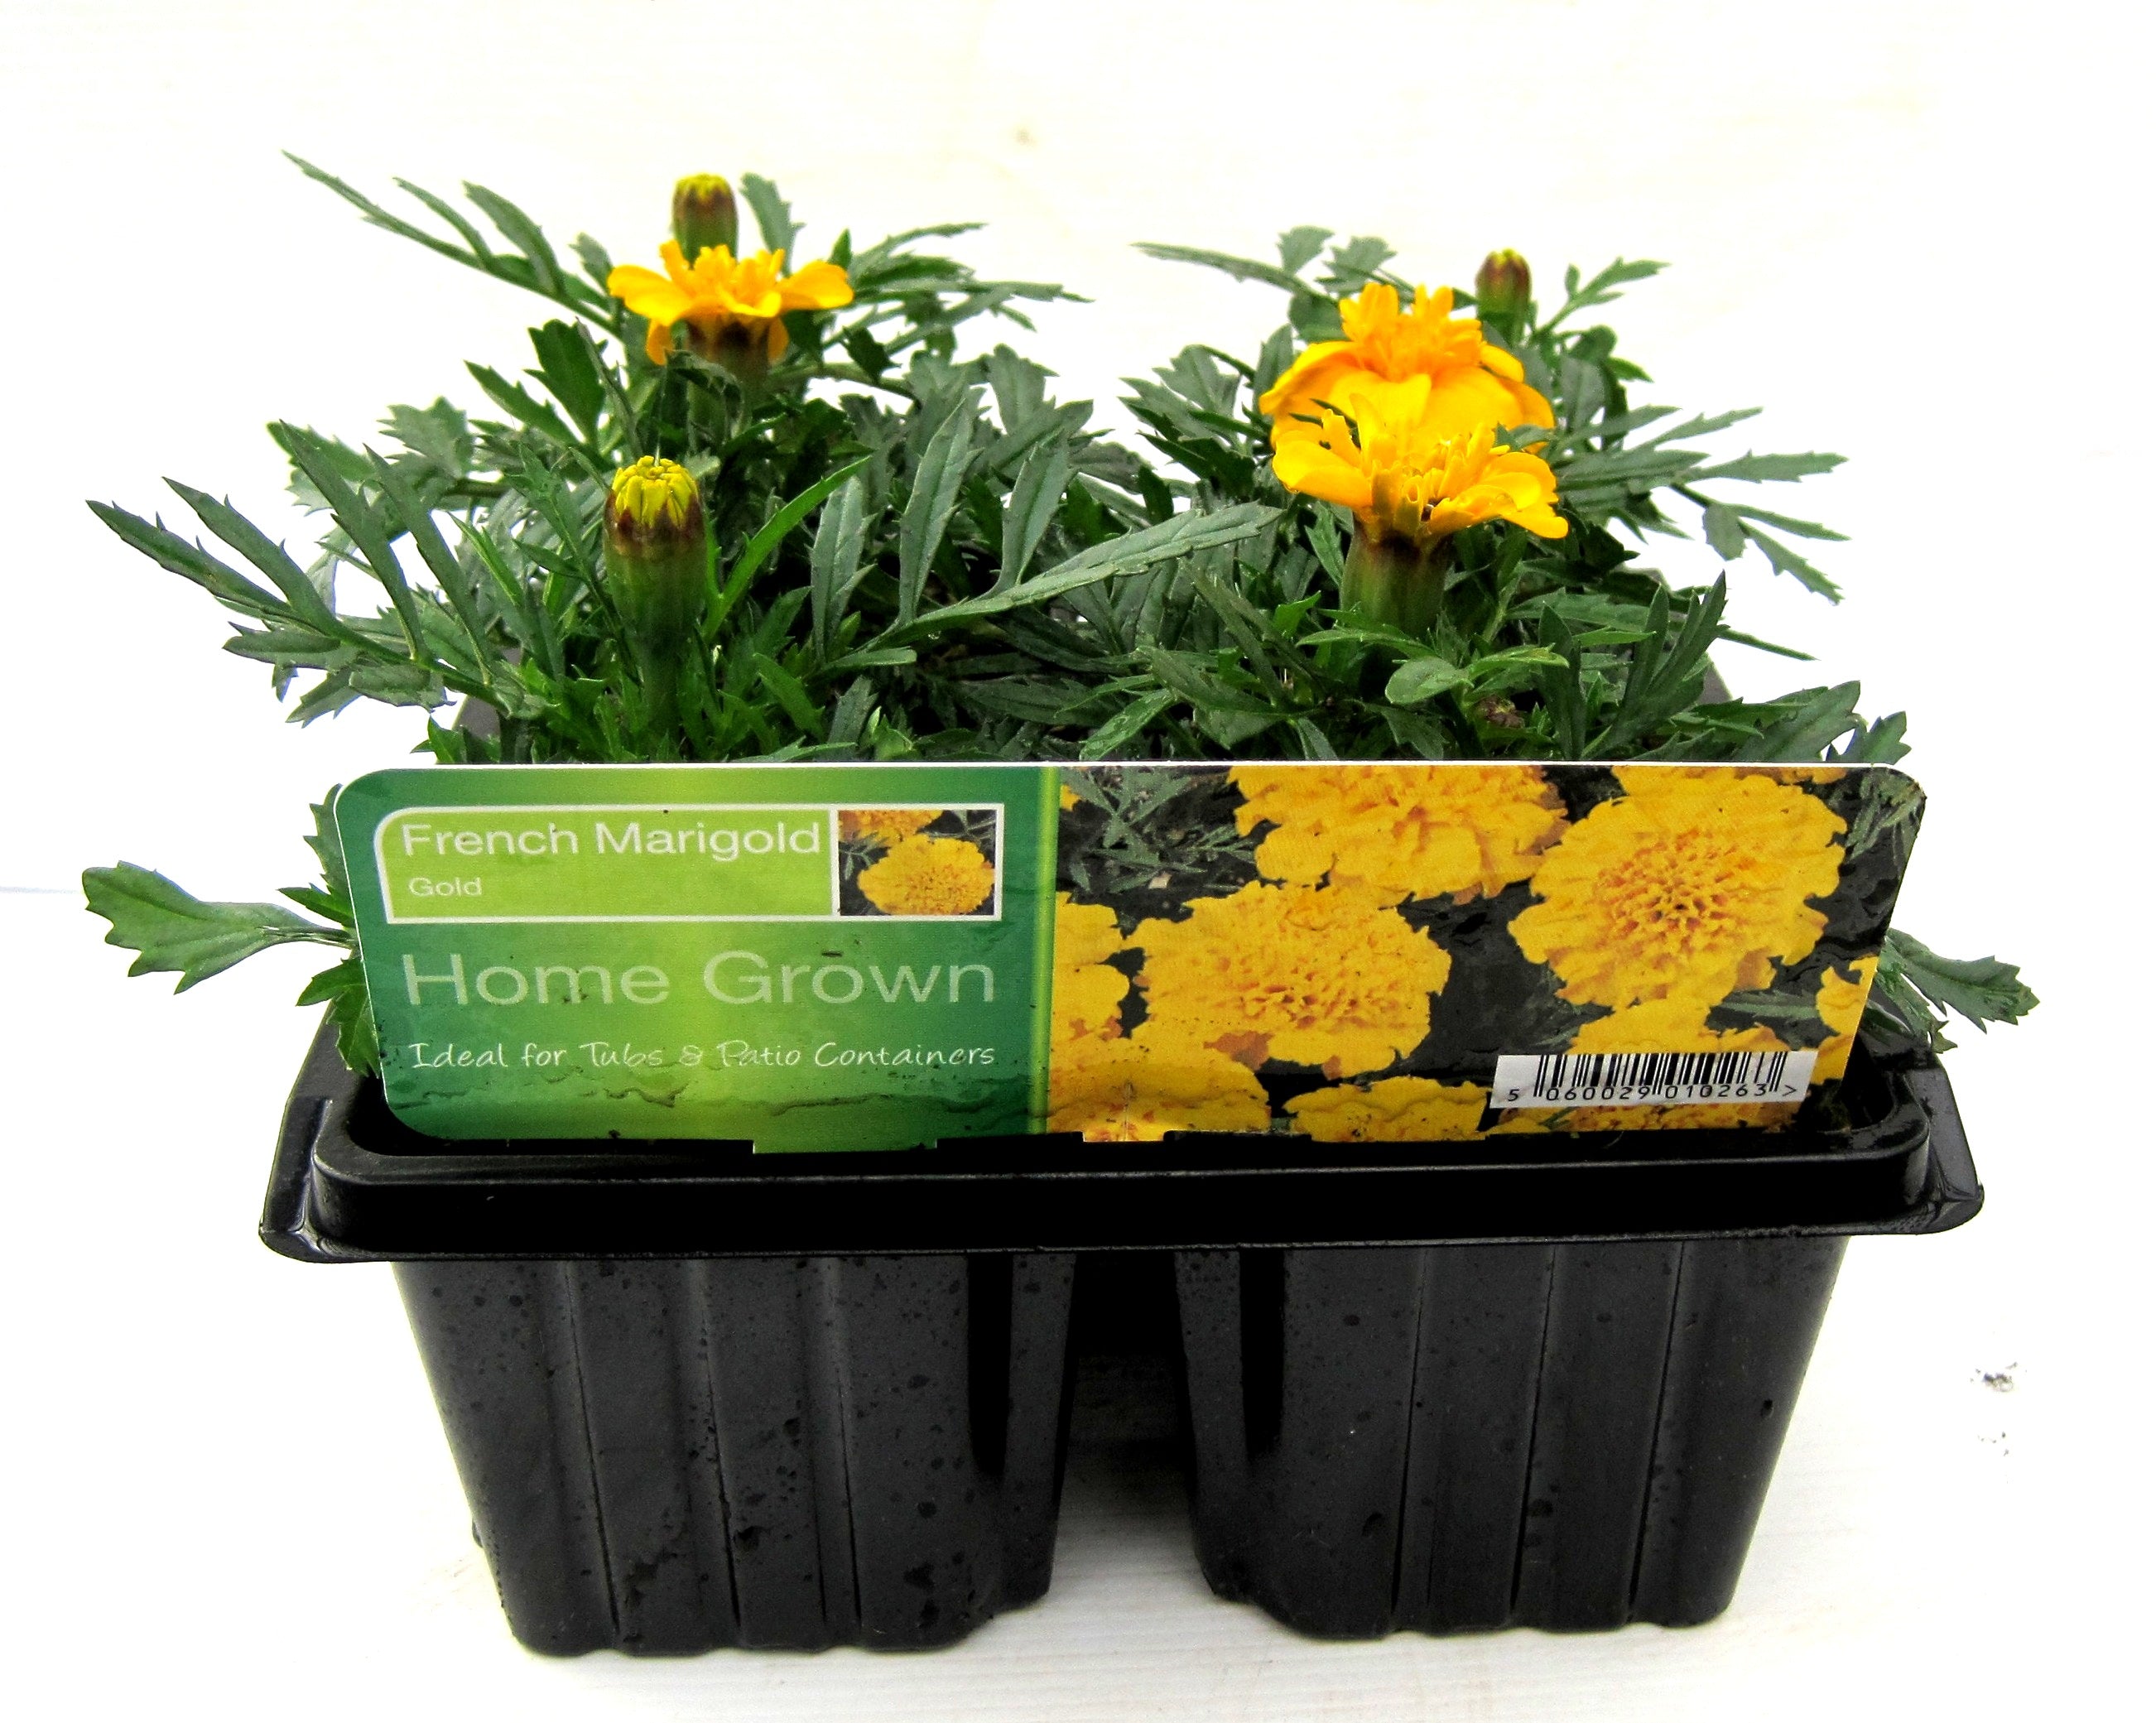 SUMMER BEDDING 6 PACK - MARIGOLD FRENCH GOLD